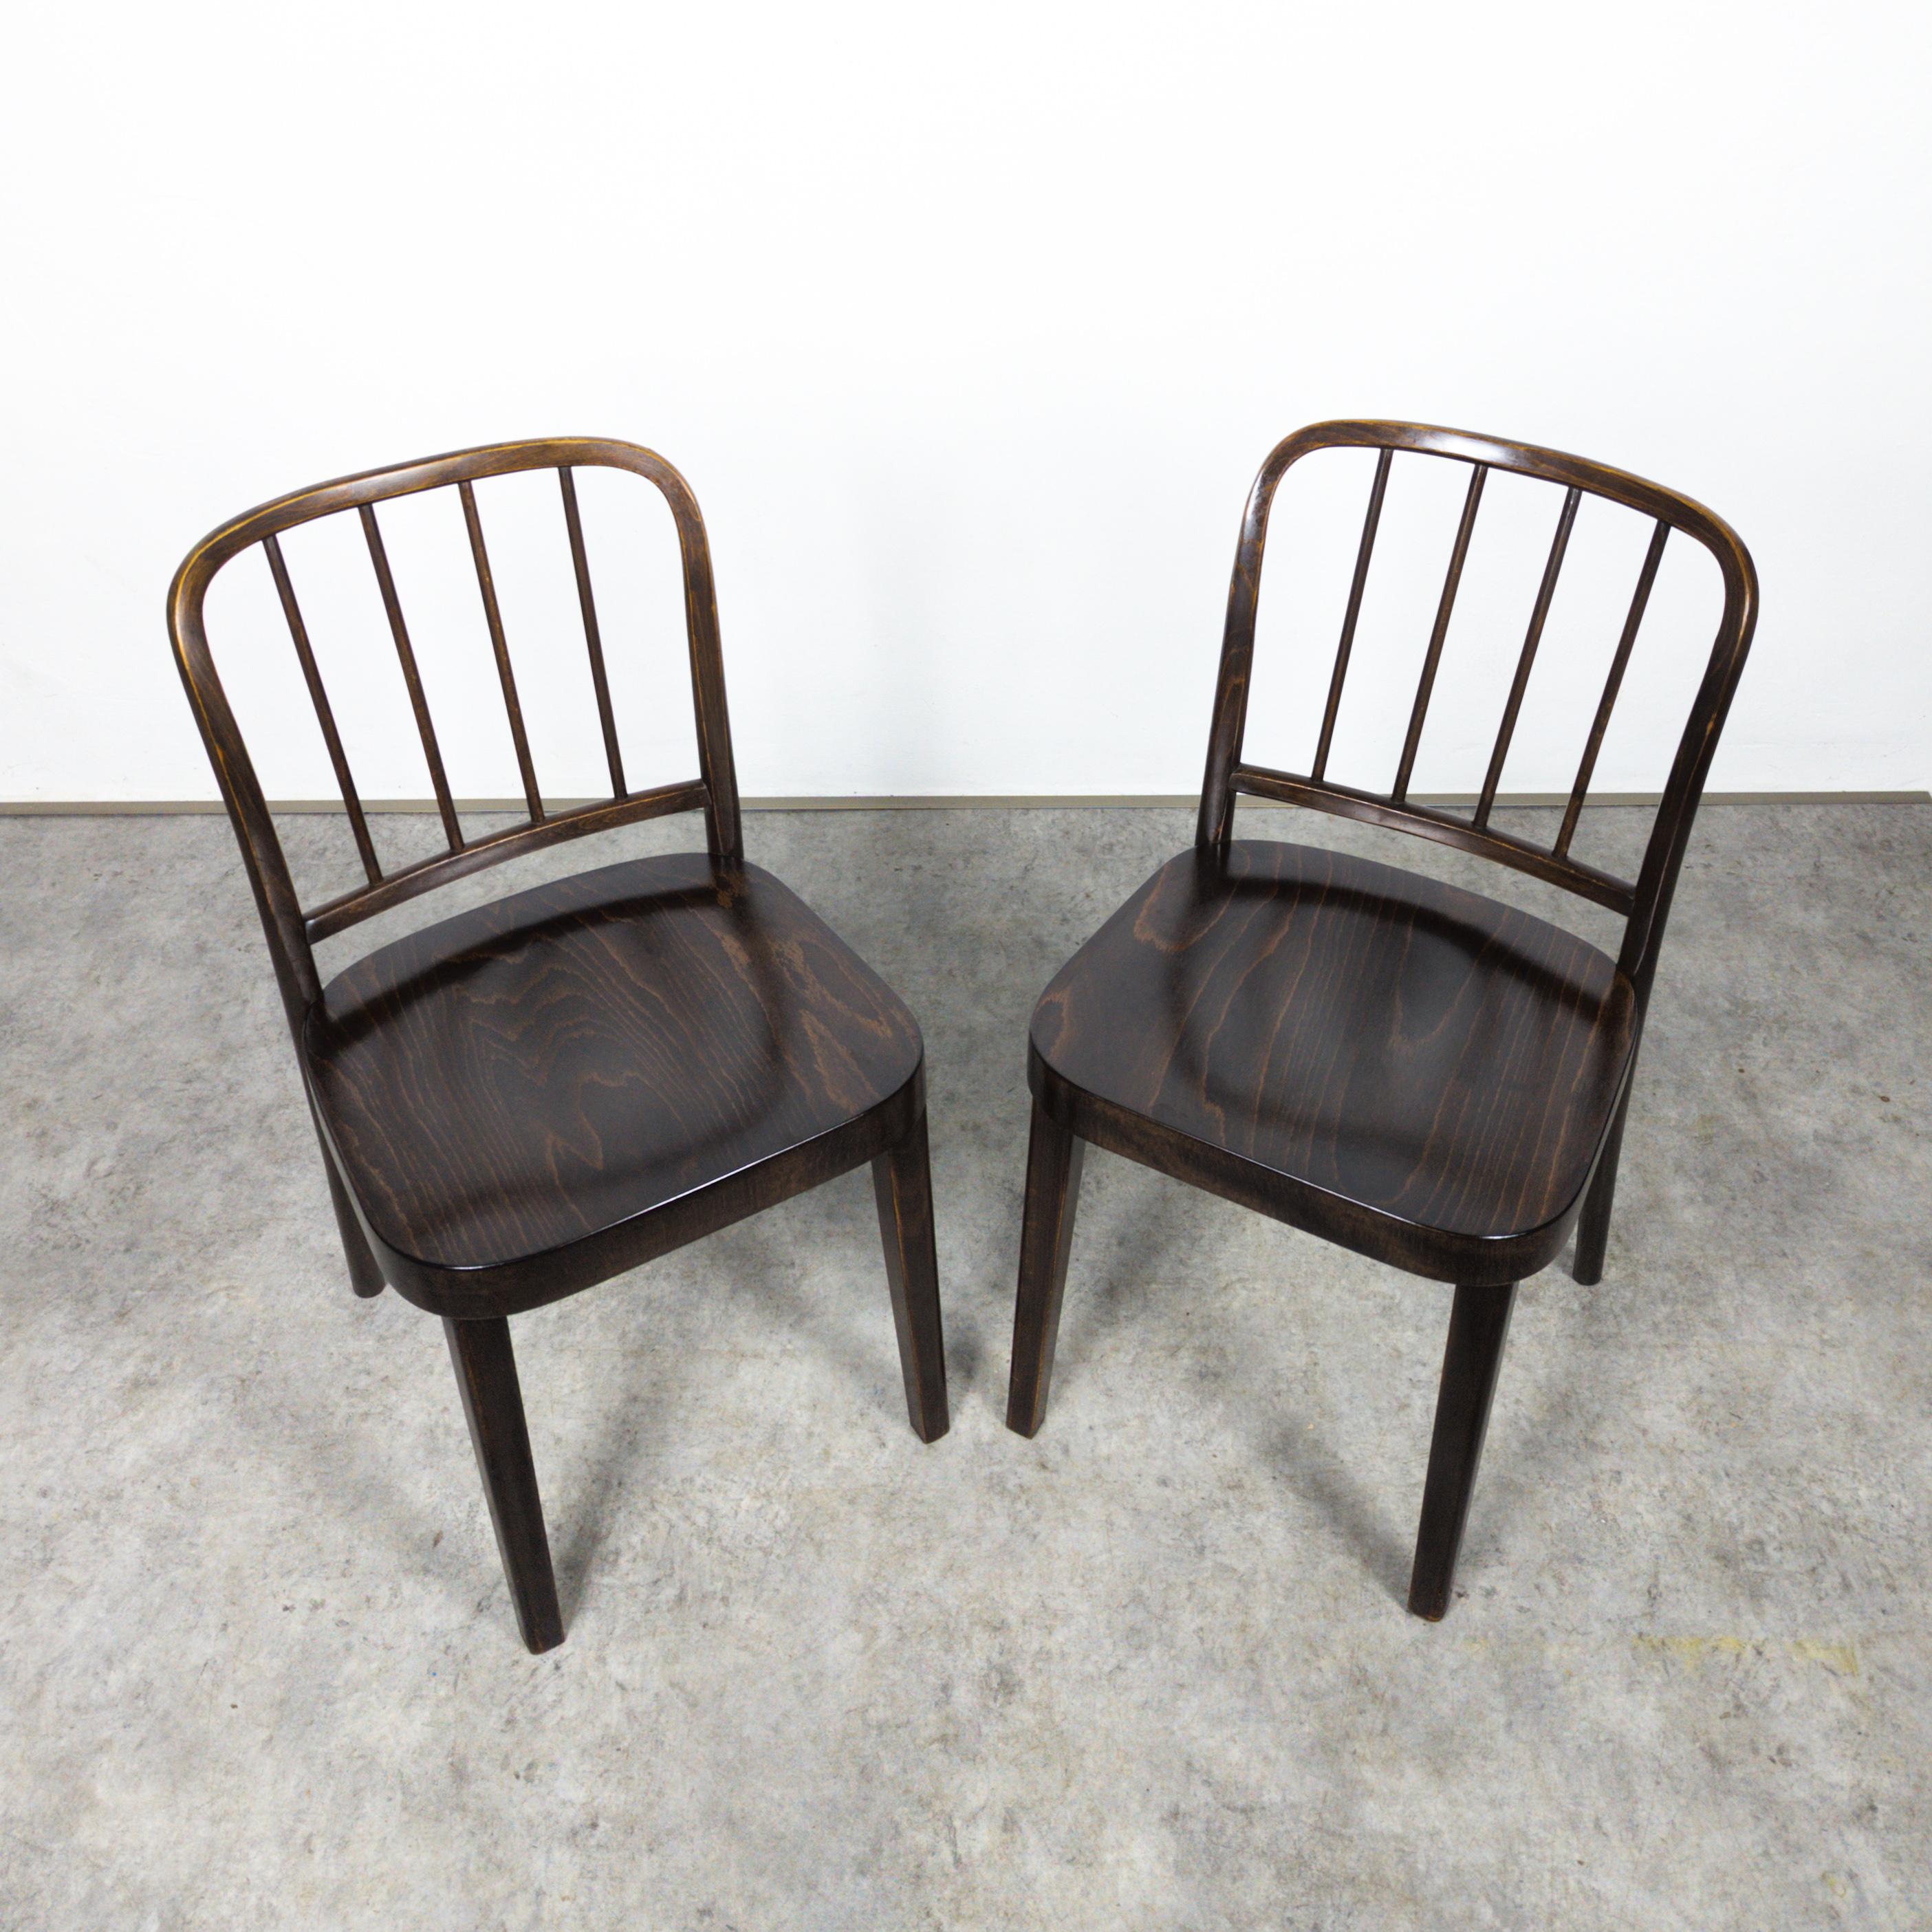 Rare set of four Thonet A 811/4 chairs by Josef Hoffmann For Sale 4